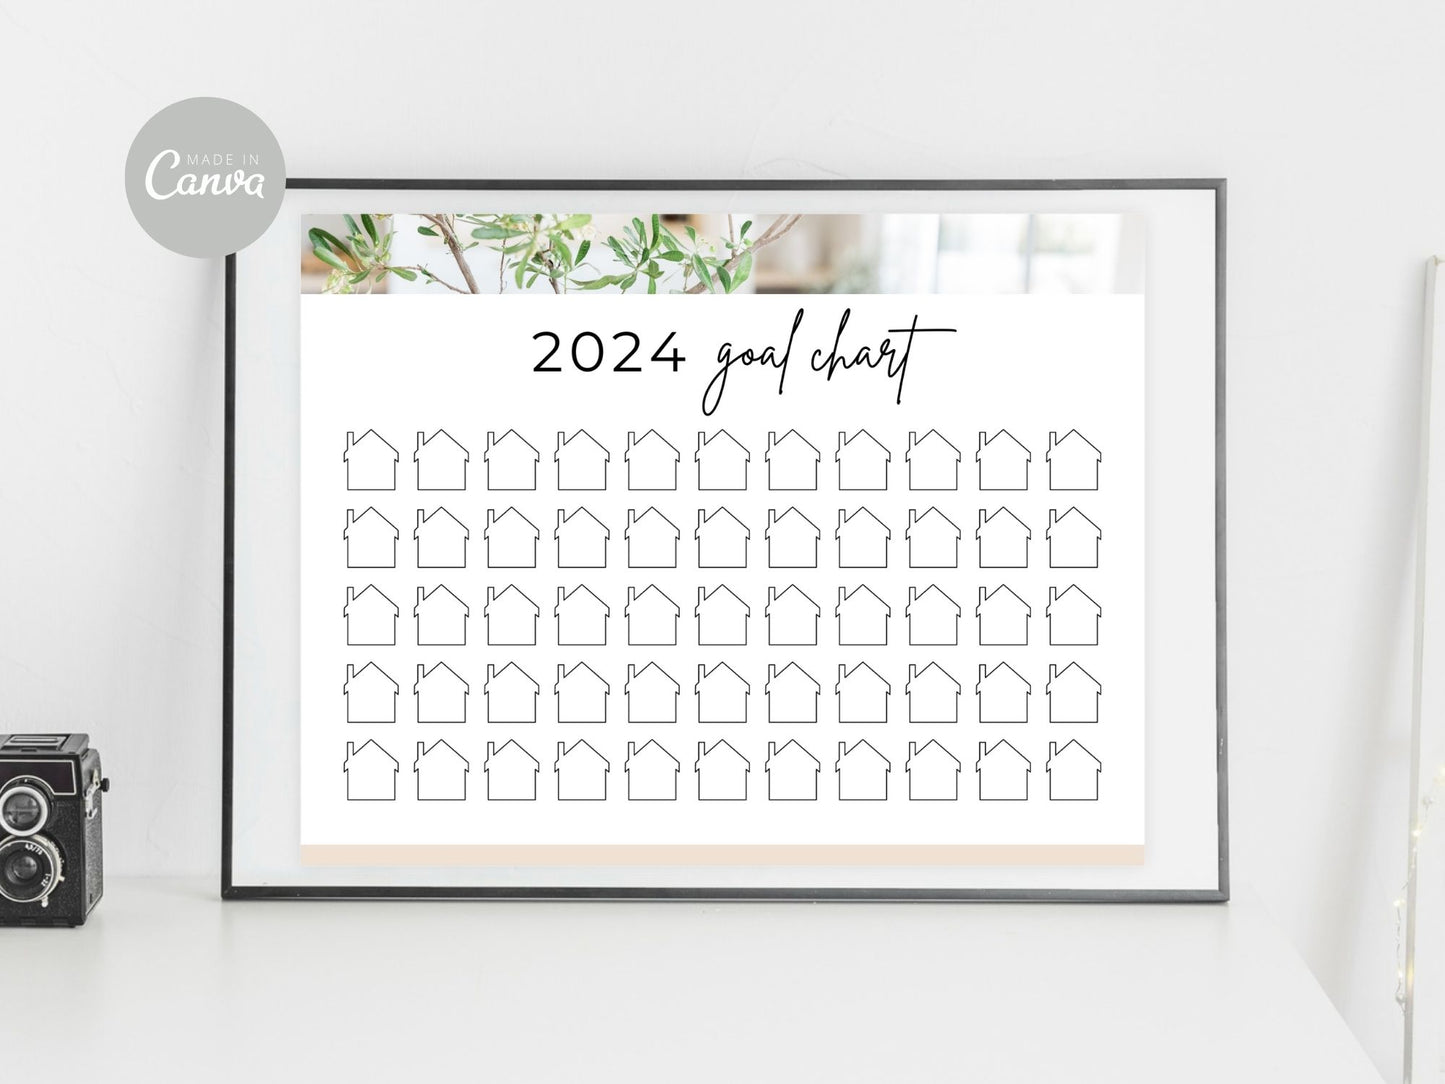 Real Estate 2024 Realtor Goal Chart - Comprehensive chart for goal setting and tracking, providing a motivational and practical tool for achieving real estate milestones in the year 2024.